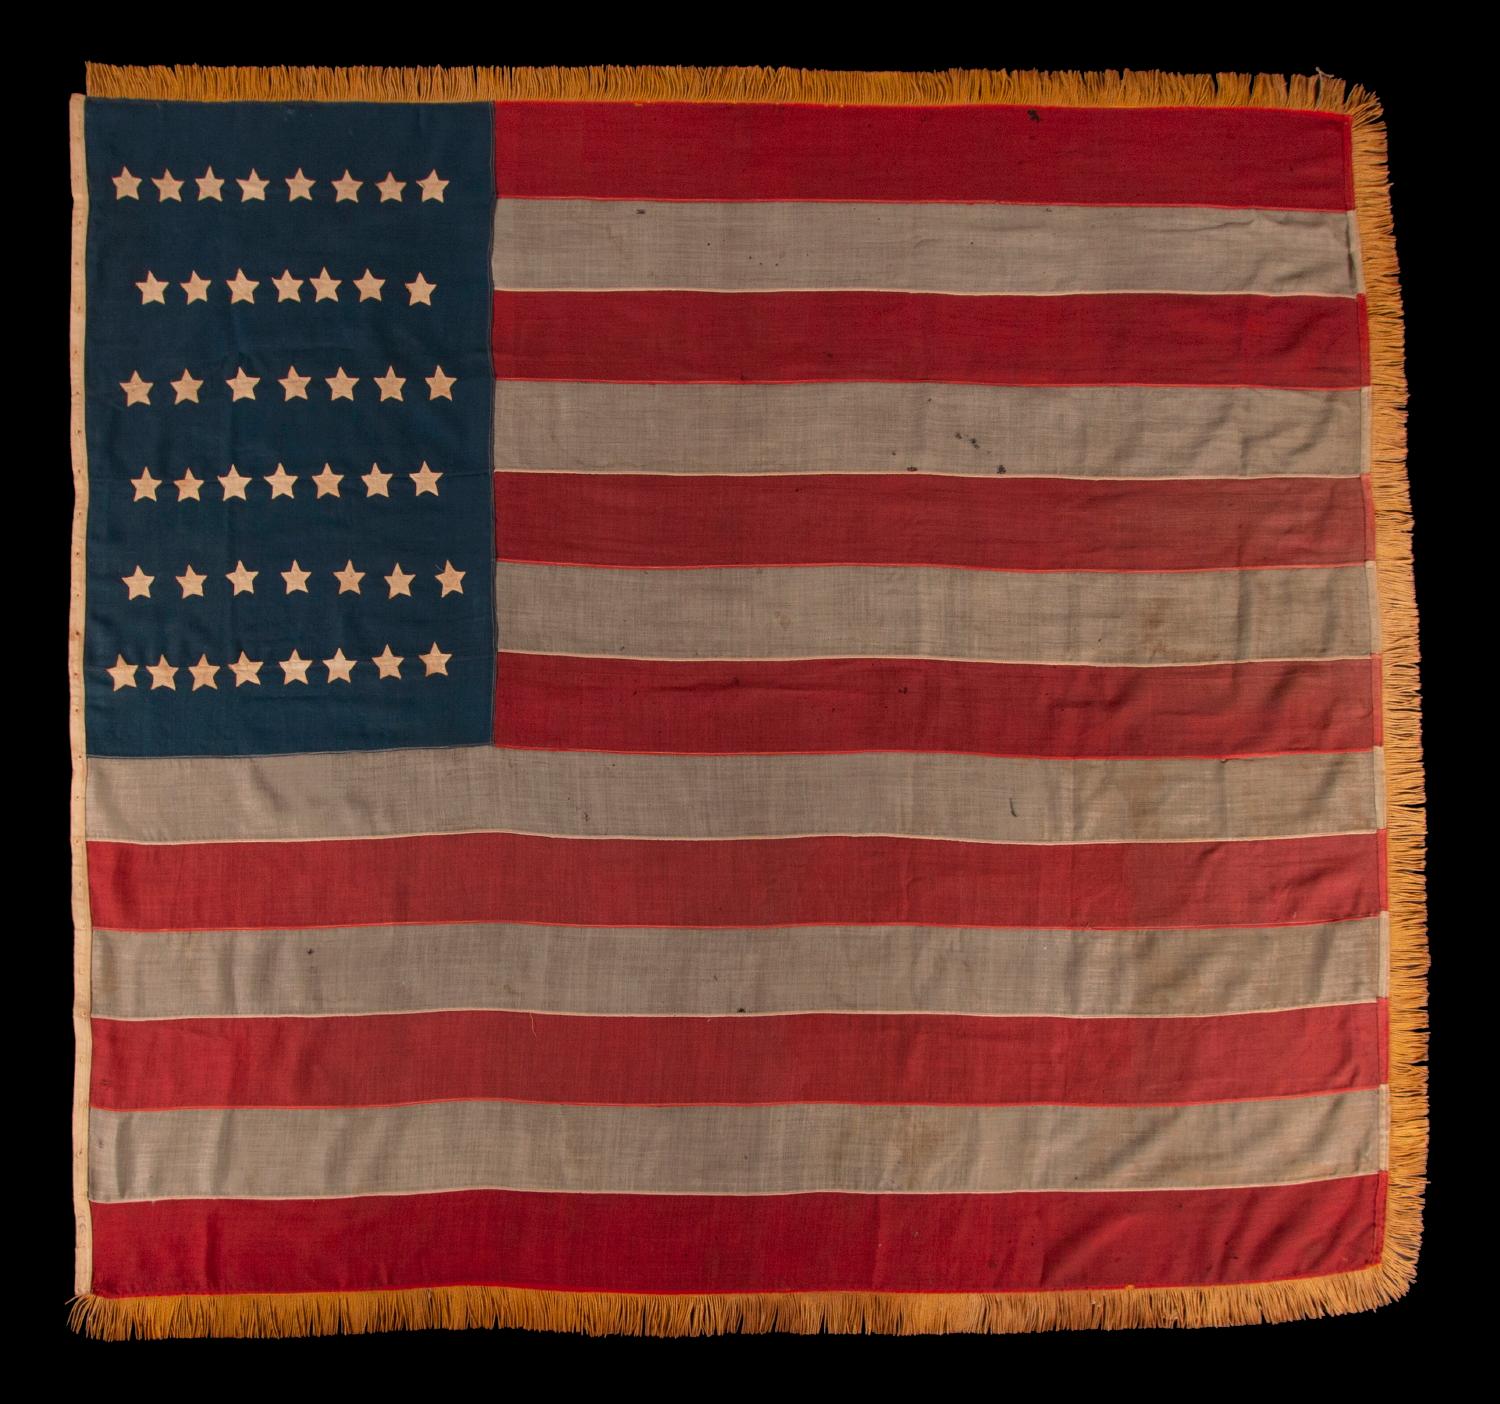 44 STARS ON AN ANTIQUE AMERICAN FLAG WITH AN EXAGGERATEDLY TALL AND NARROW CANTON, ON A U.S. ARMY REGULATION BATTLE FLAG MADE DURING THE LATE INDIAN WARS PERIOD, REFLECTS THE RECENT ADDITION OF WYOMING TO THE UNION, 1890-1896:

This rare and